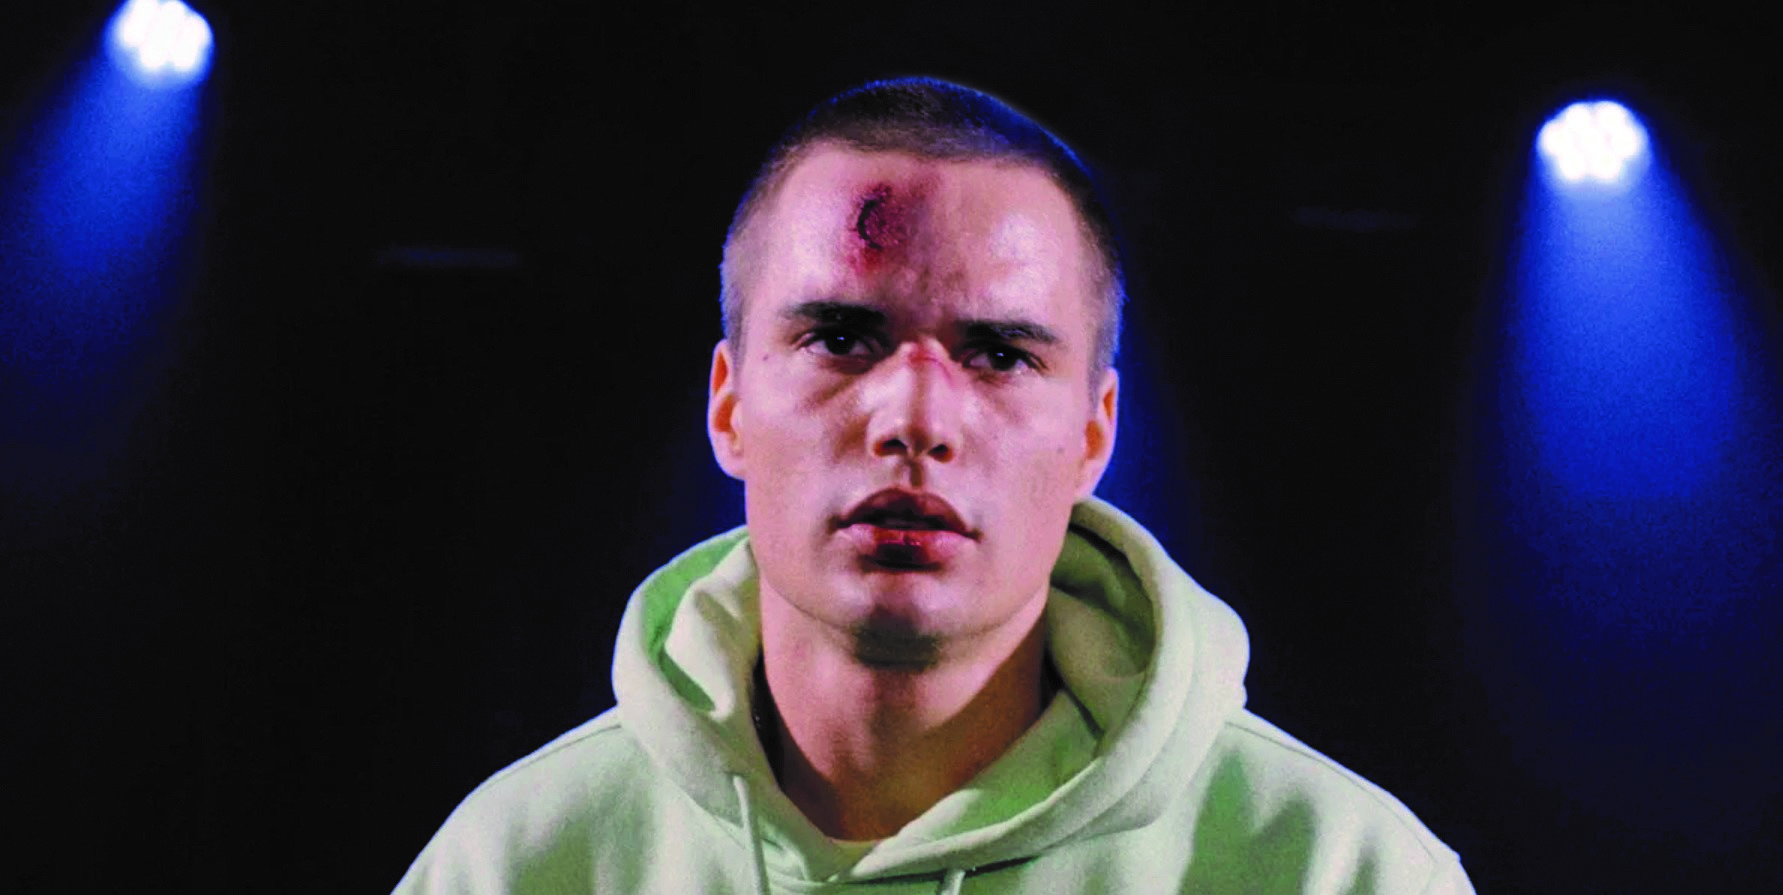 Close-up film still of a young man with fresh injuries on his nose and forehead with a determined expression. The background is stark black except for two spotlights on either side of him.